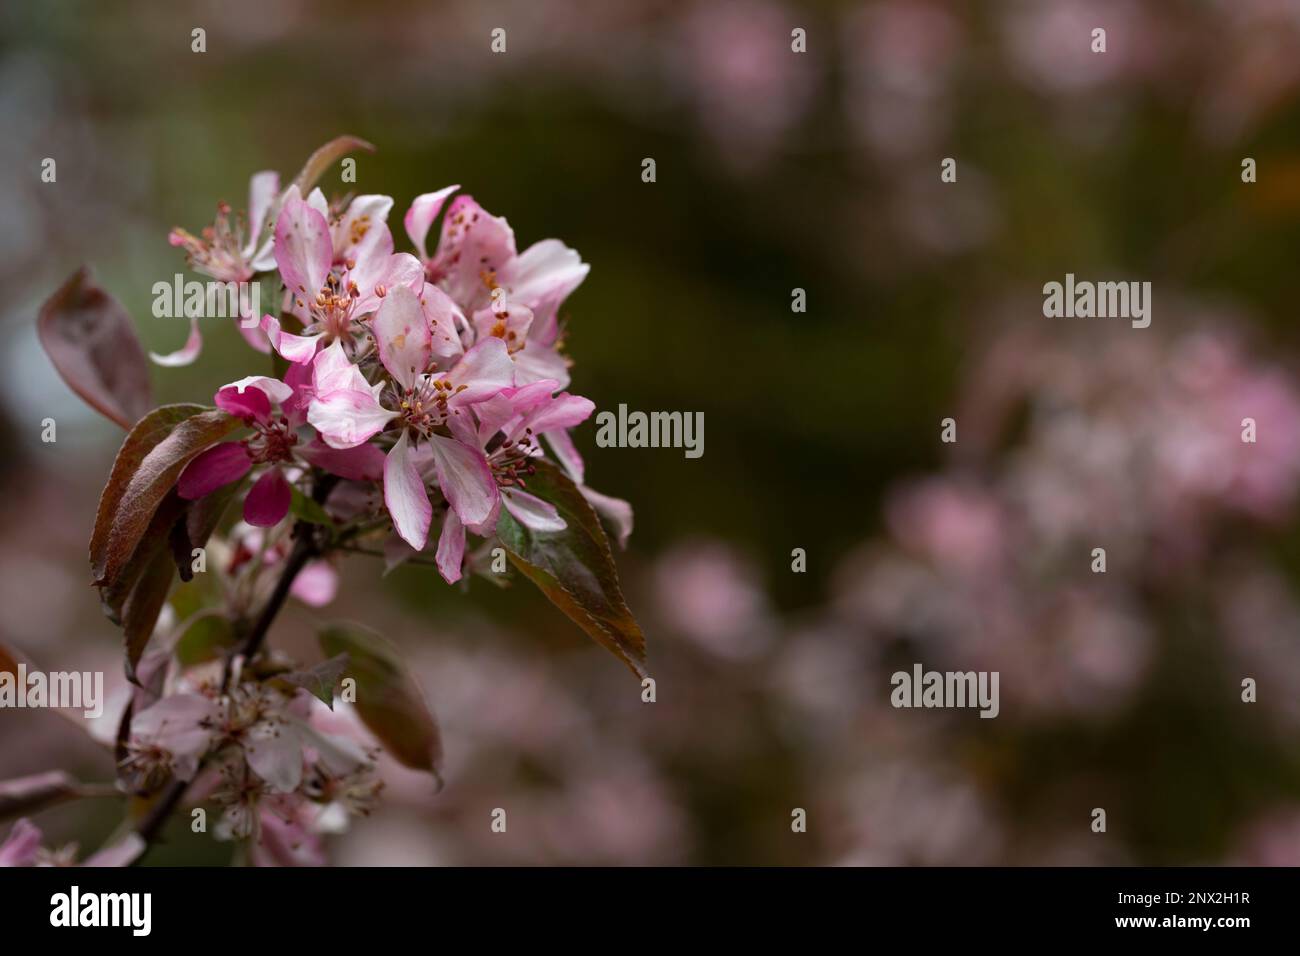 Malus niedzwetzkyana closeup, selective soft focus. Decorative apple tree with bright flowers. Purple blossoms in spring apple tree garden close up Stock Photo